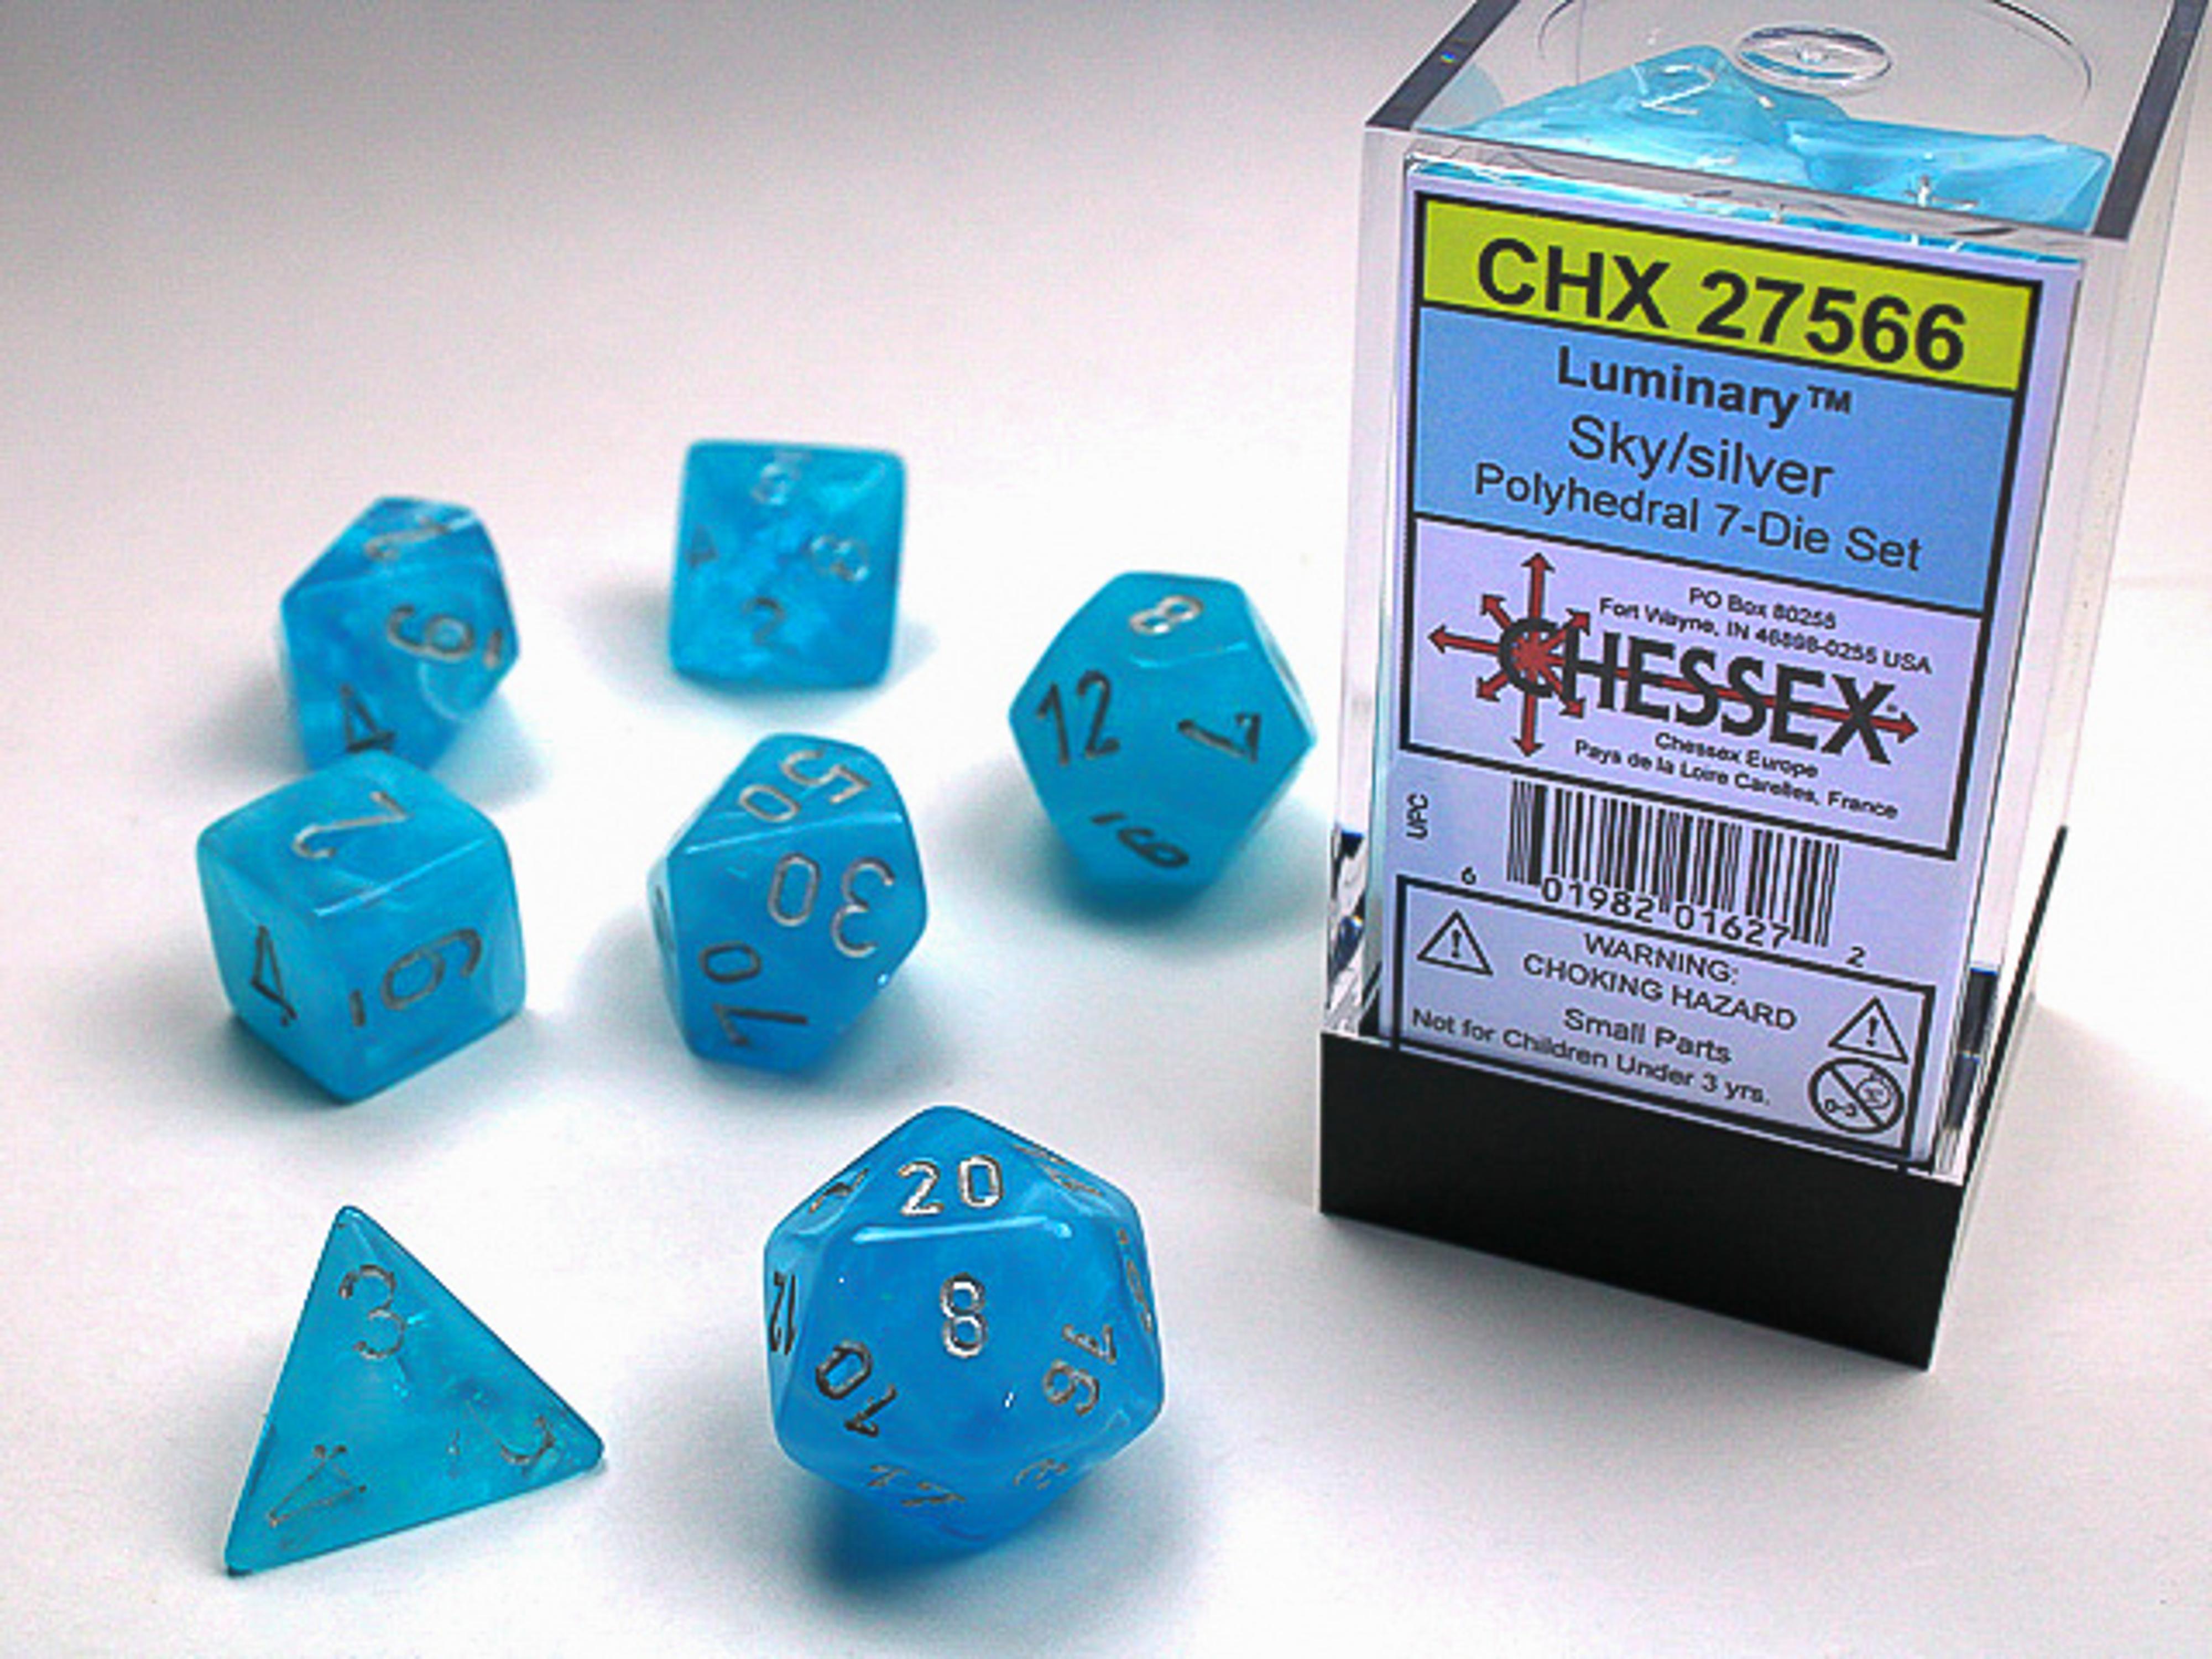 Chessex Luminary Glow-in-the-Dark Polyhedral Sky/Silver 7 Die Set